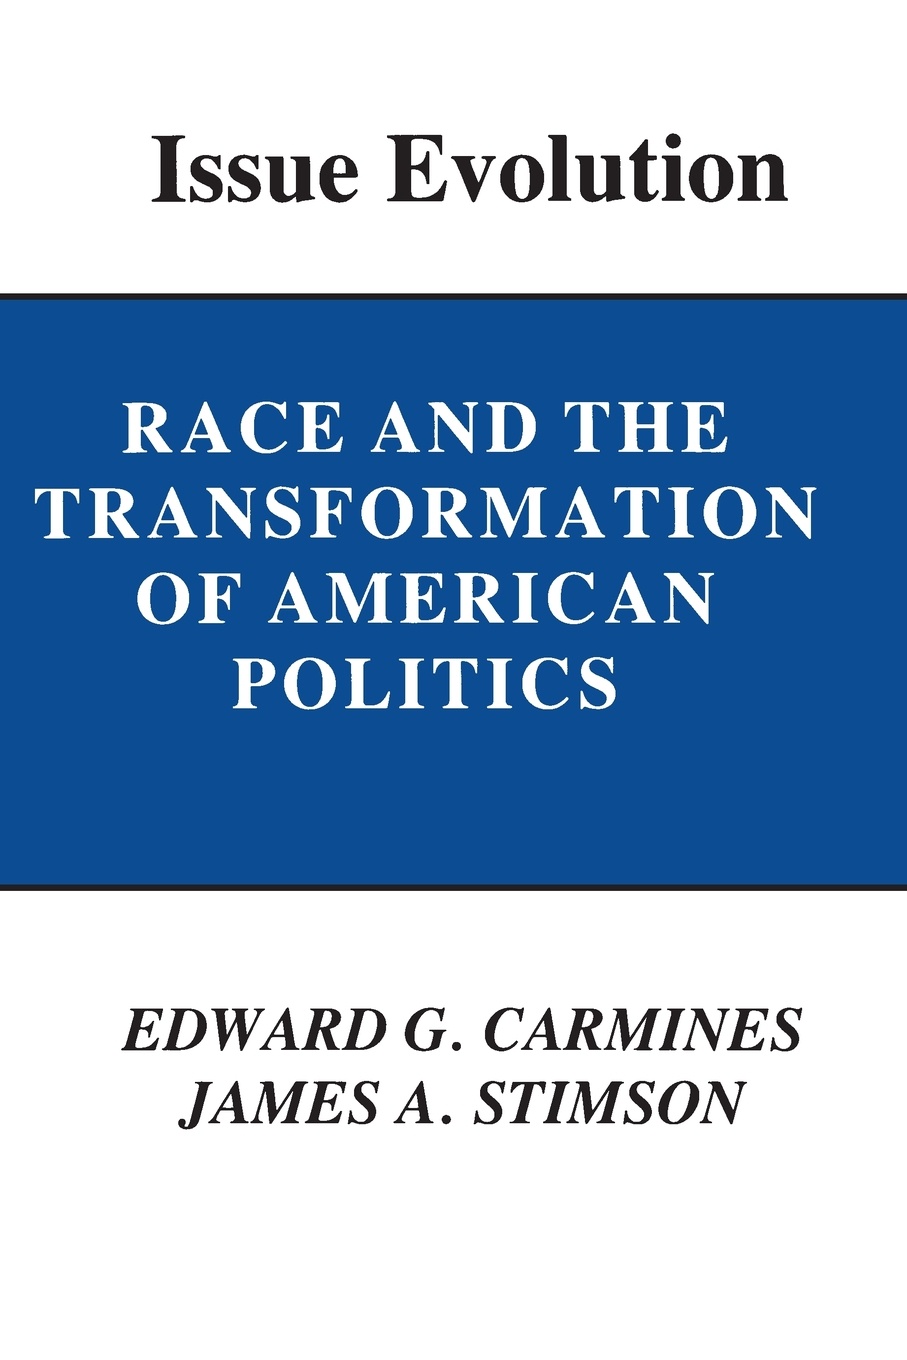 Issue Evolution. Race and the Transformation of American Politics